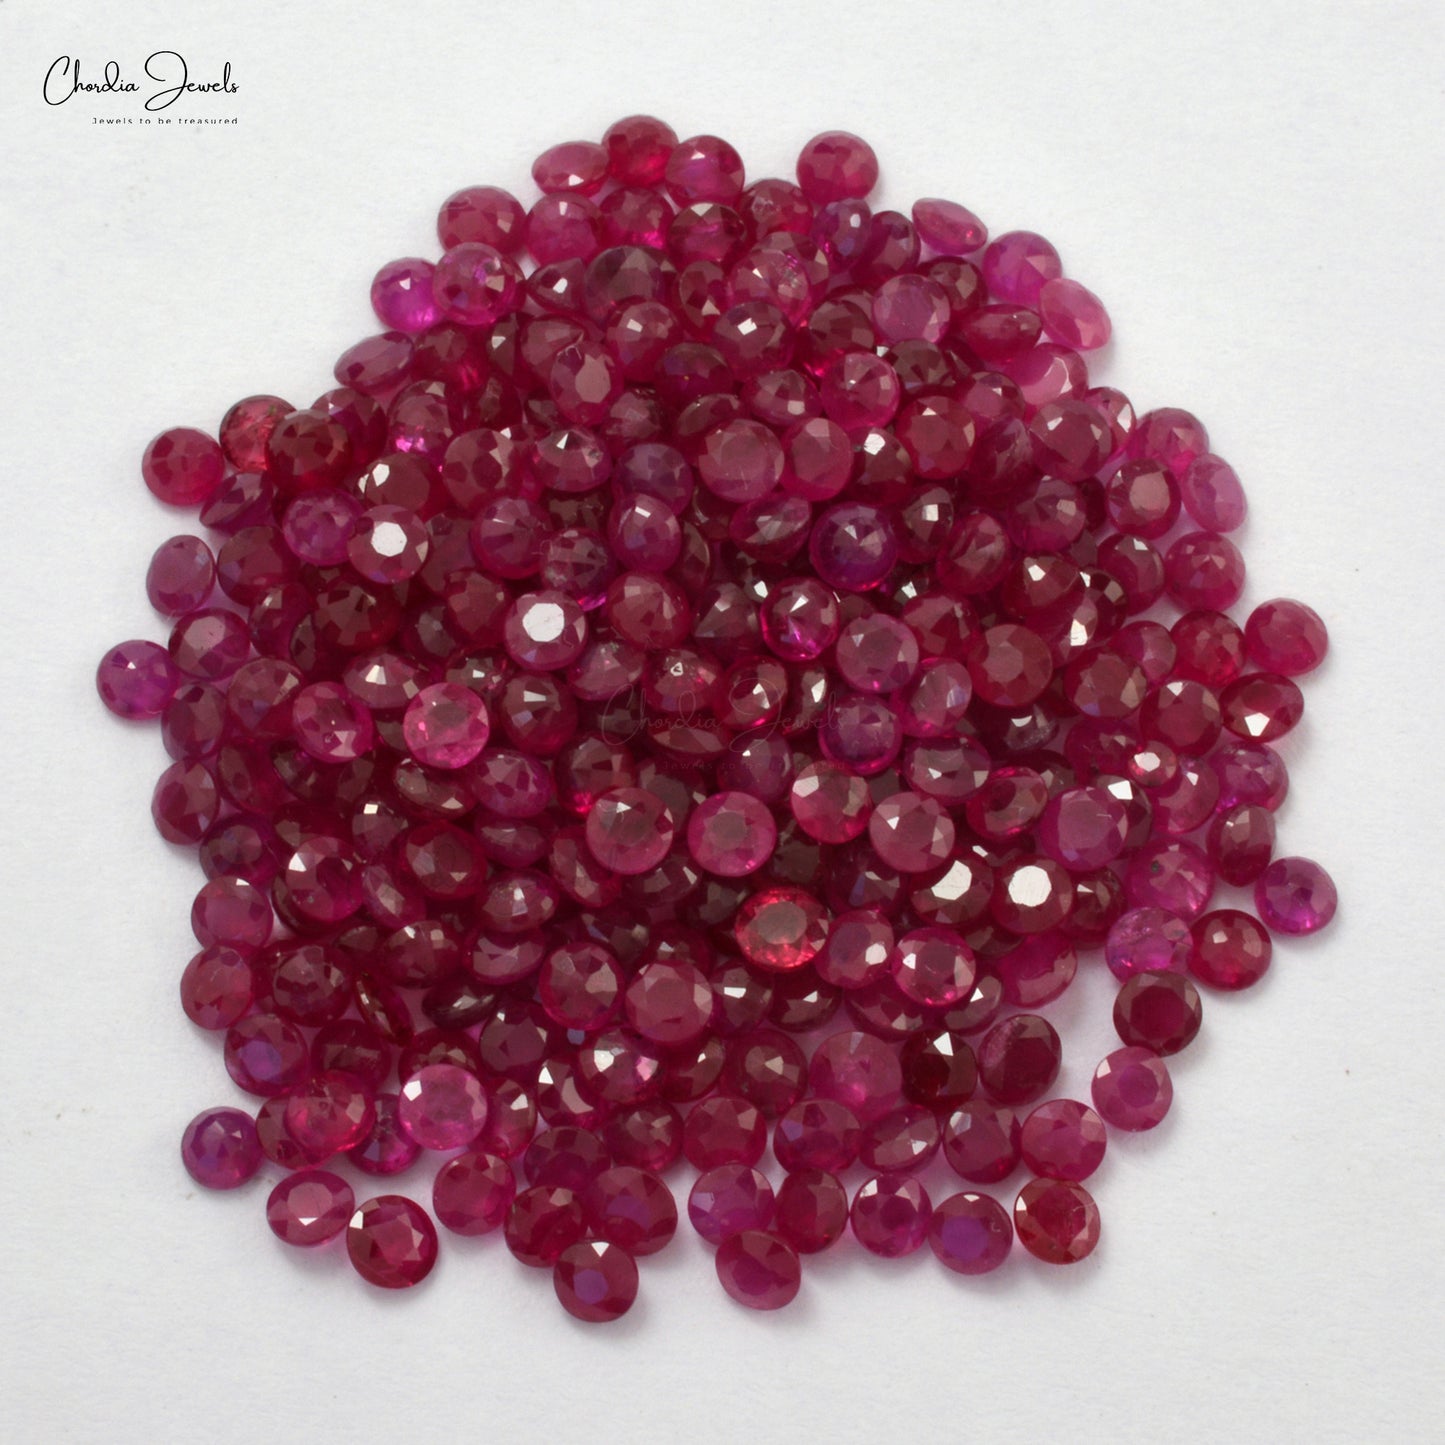 High Quality Genuine Ruby Faceted Round 2 MM - 2.50 MM, 1 Piece